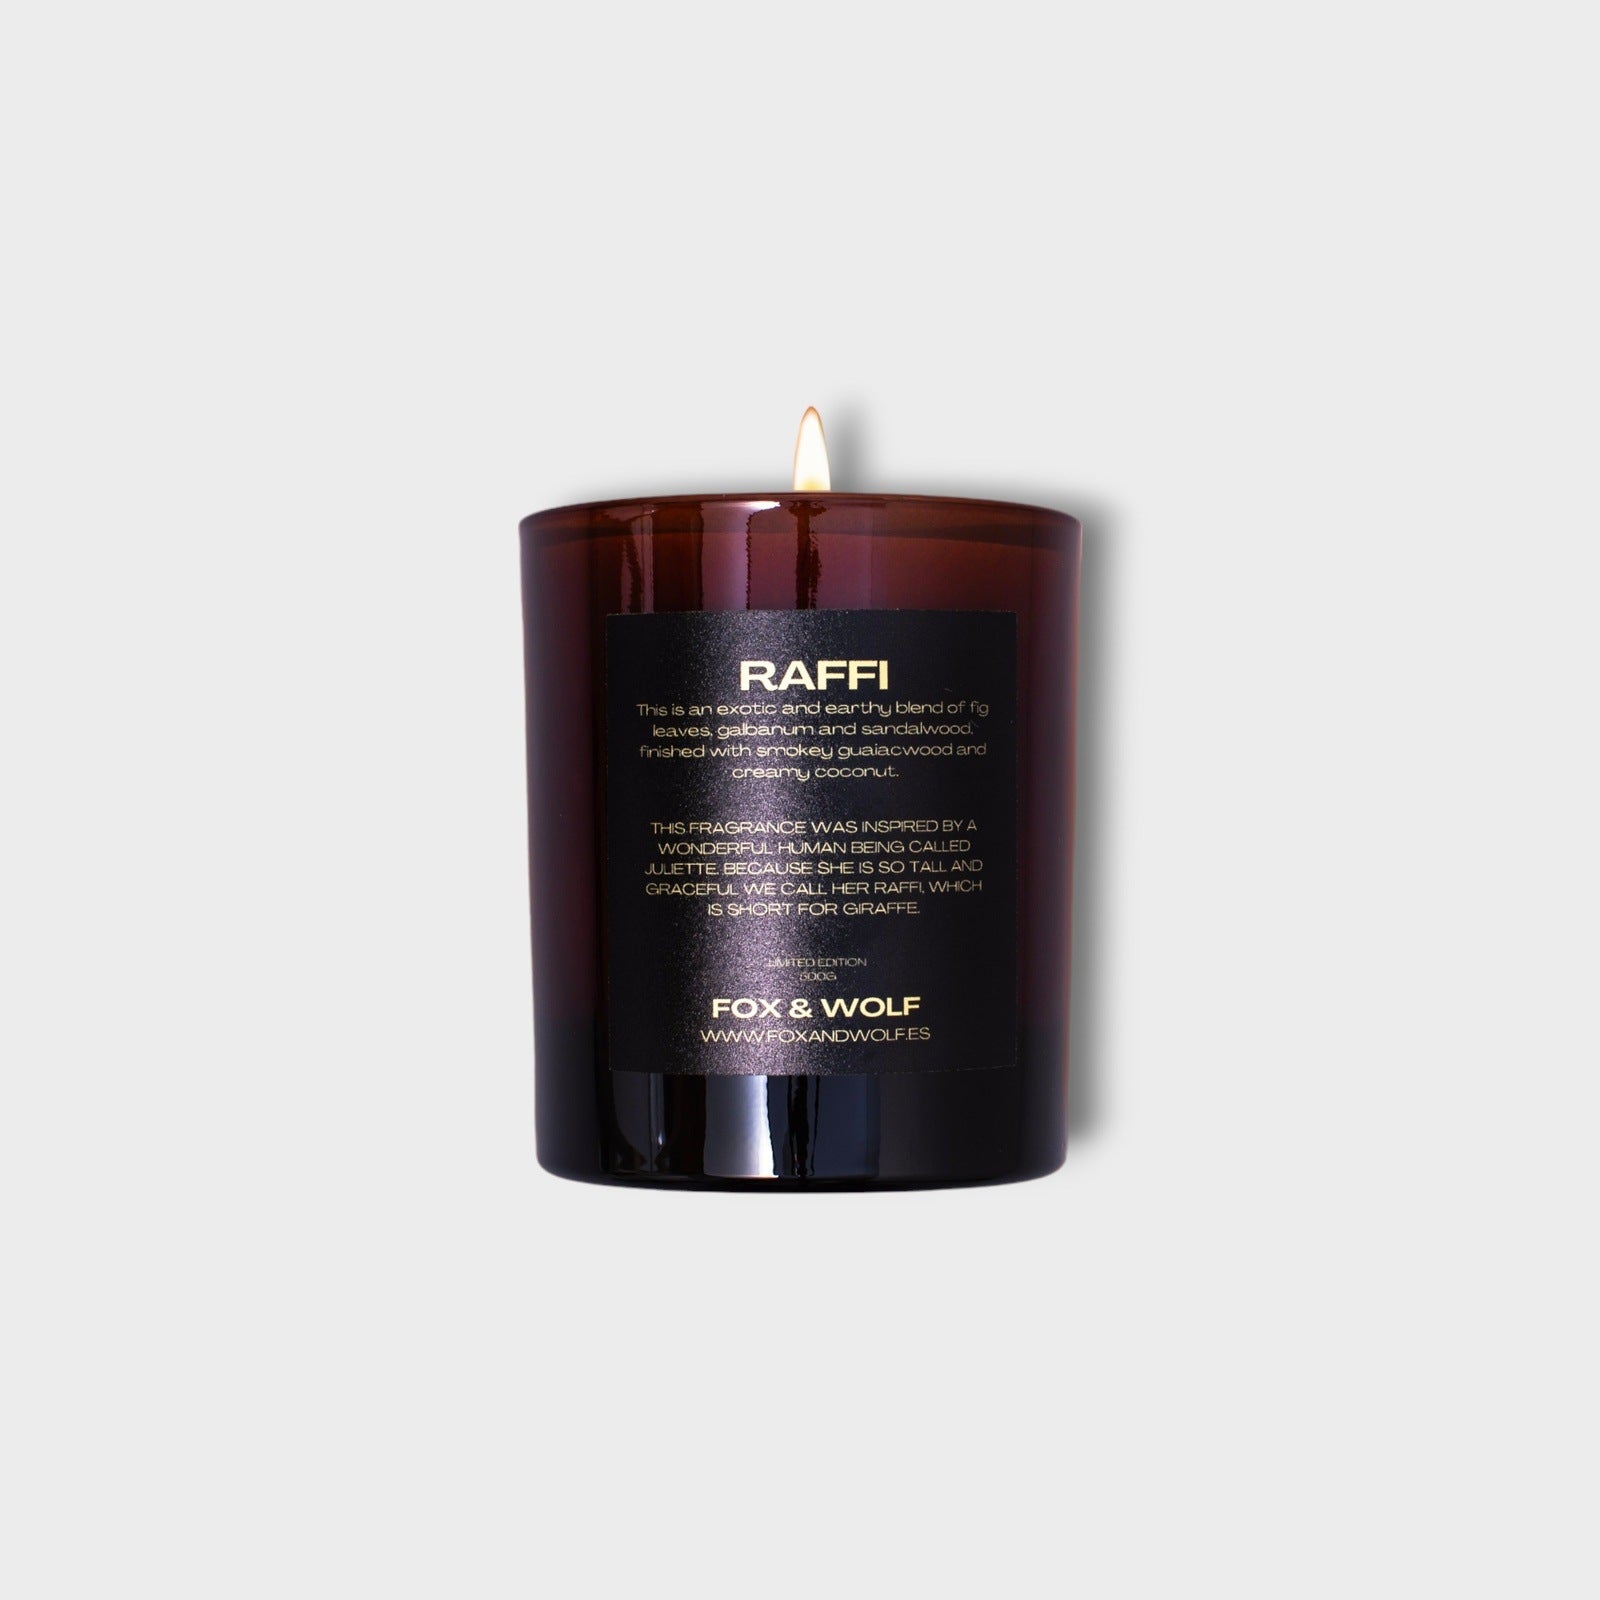 300 G RAFFI SCENTED CANDLE